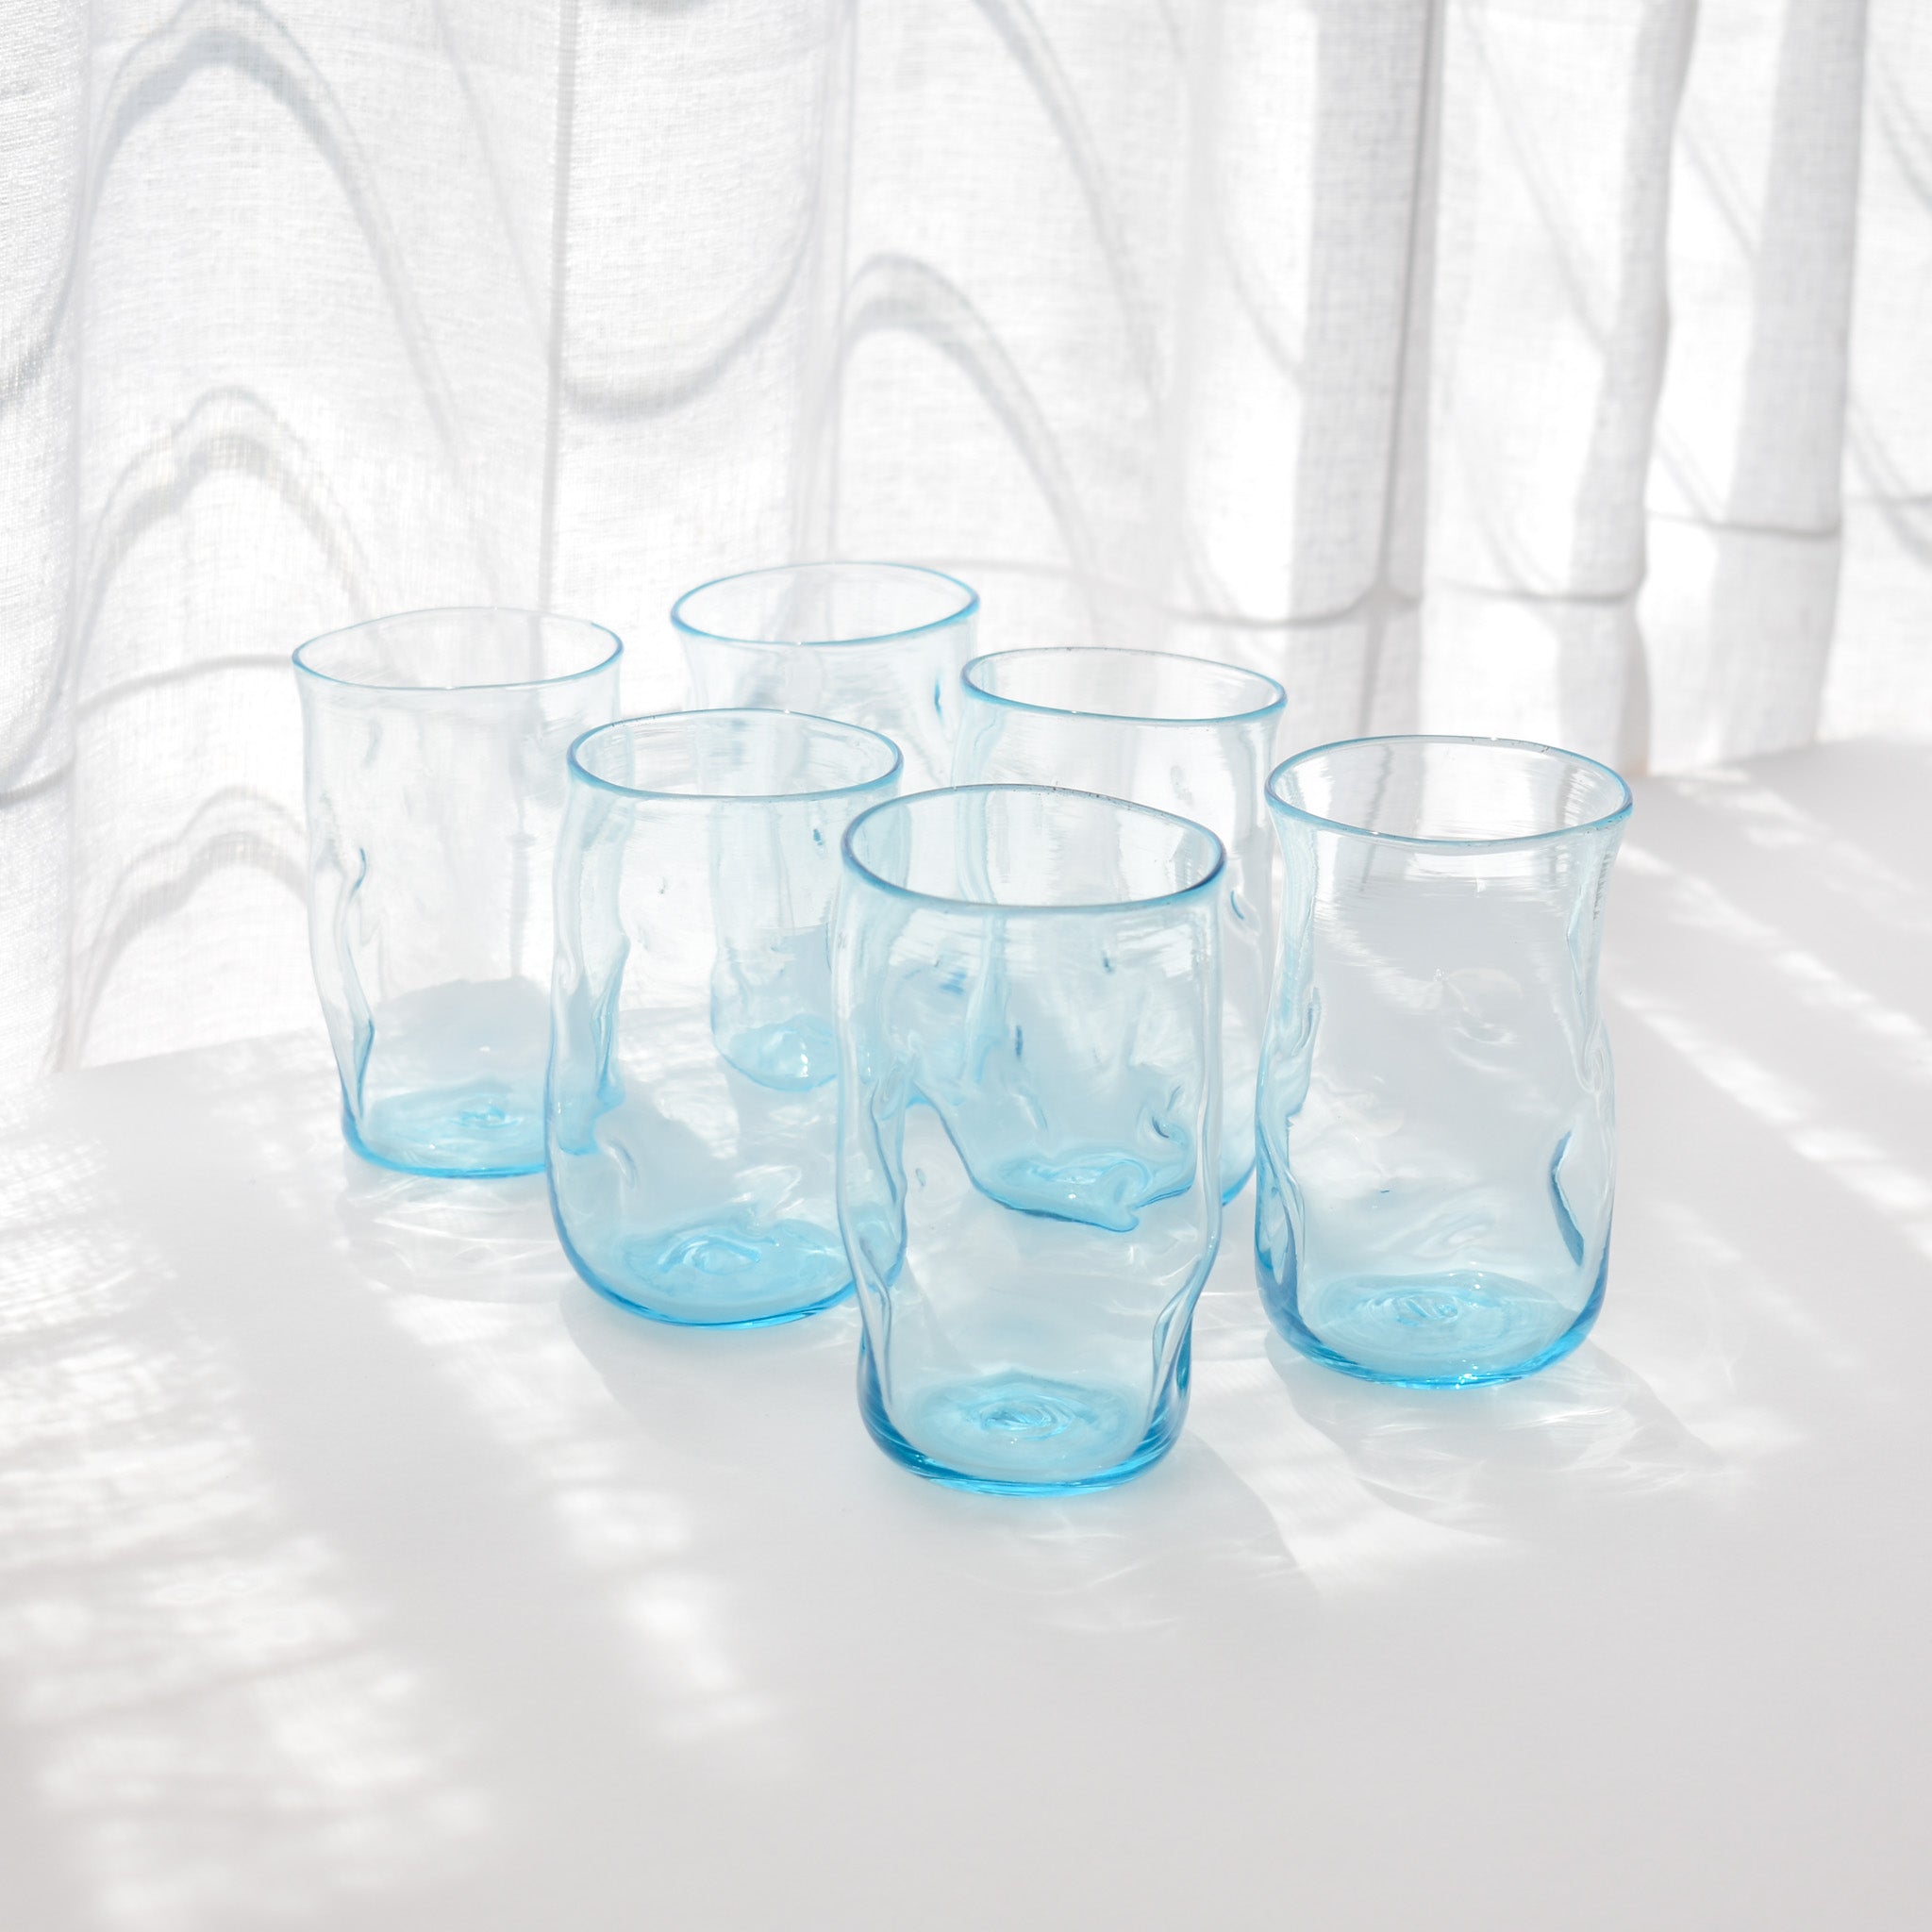 Archimide Seguso Pinched Glasses